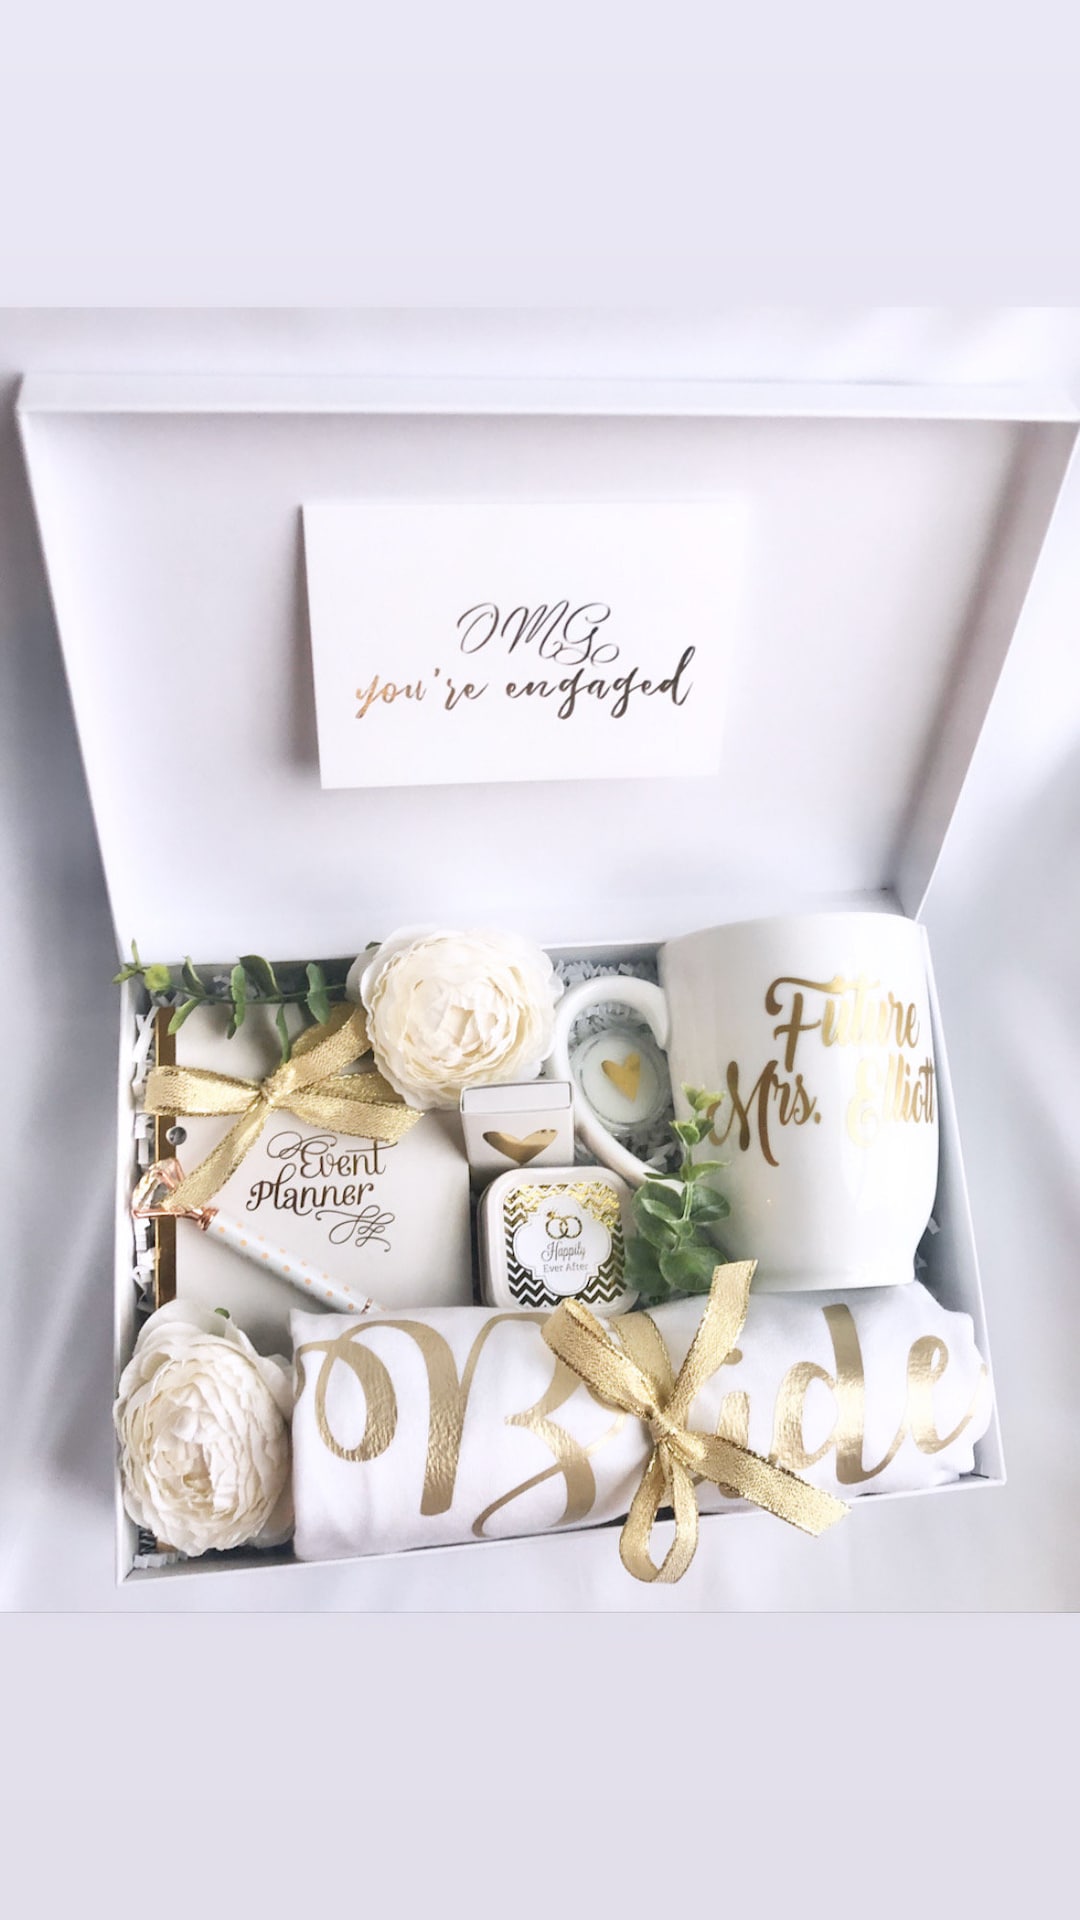 Bride To Be Gifts Box, Best Bridal Shower Bachelorette Gifts For Bride,  Wedding Gift Engagement Gifts For Women, Bachelor Party Gifts Fiance Gifts  For